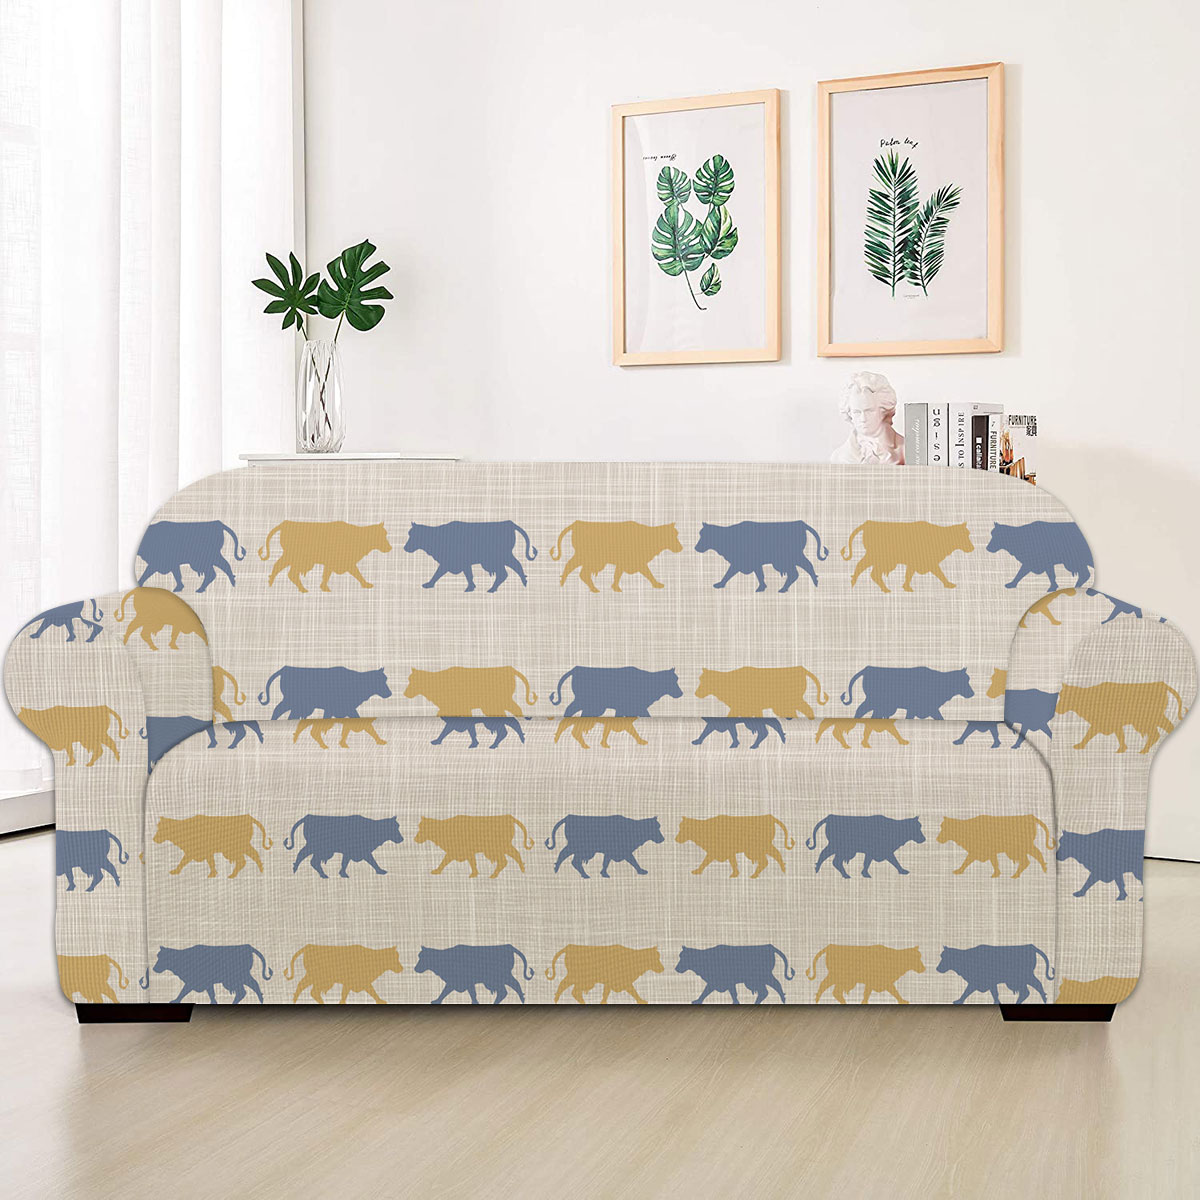 Cow Silhouette Pattern Sofa Cover